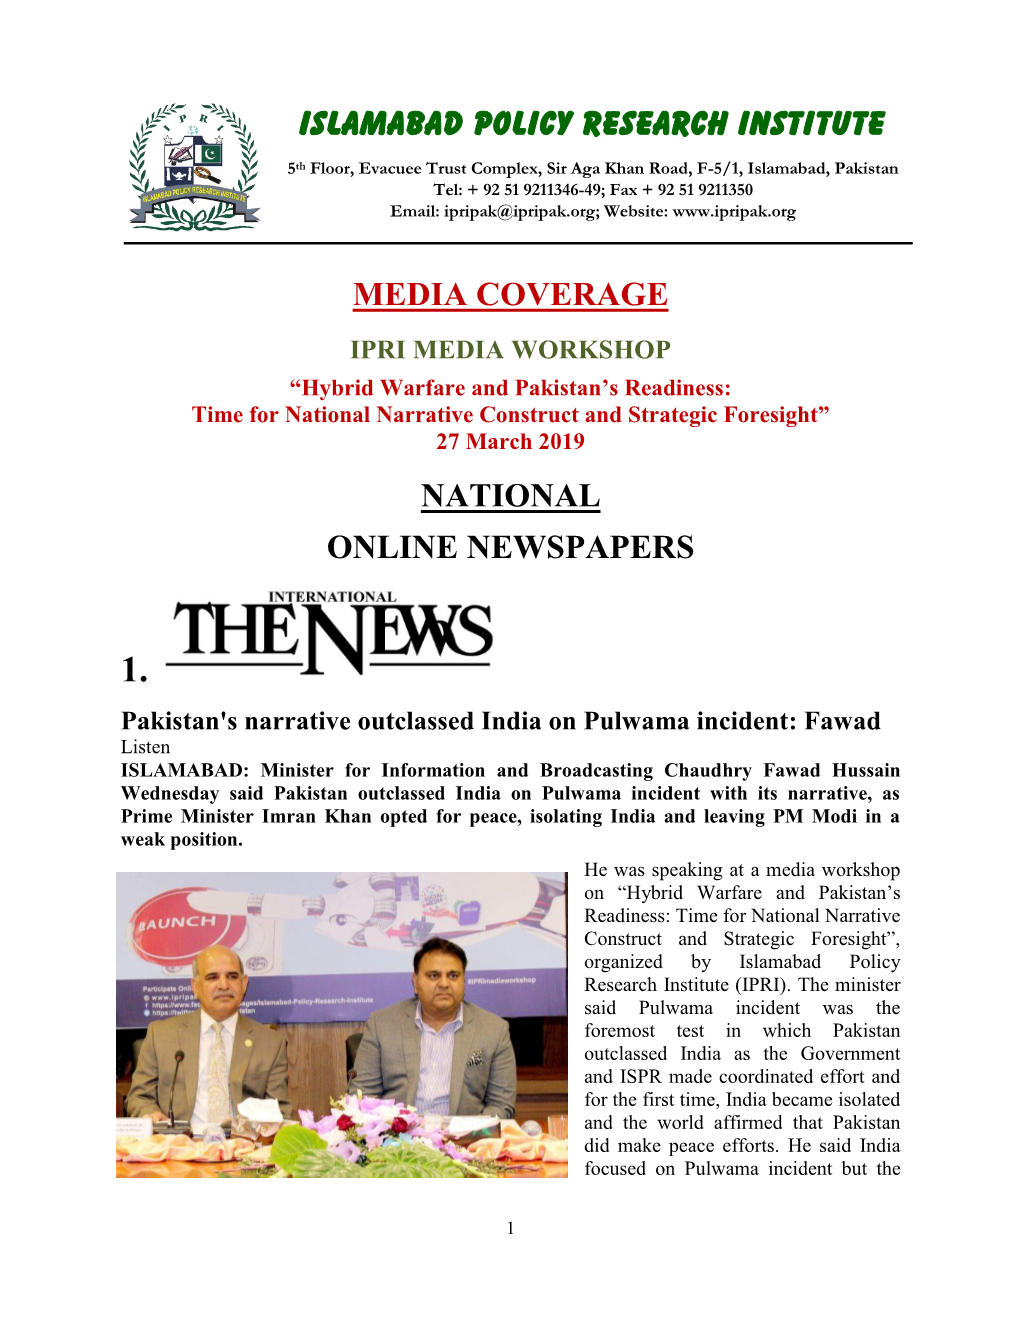 Media Coverage National Online Newspapers